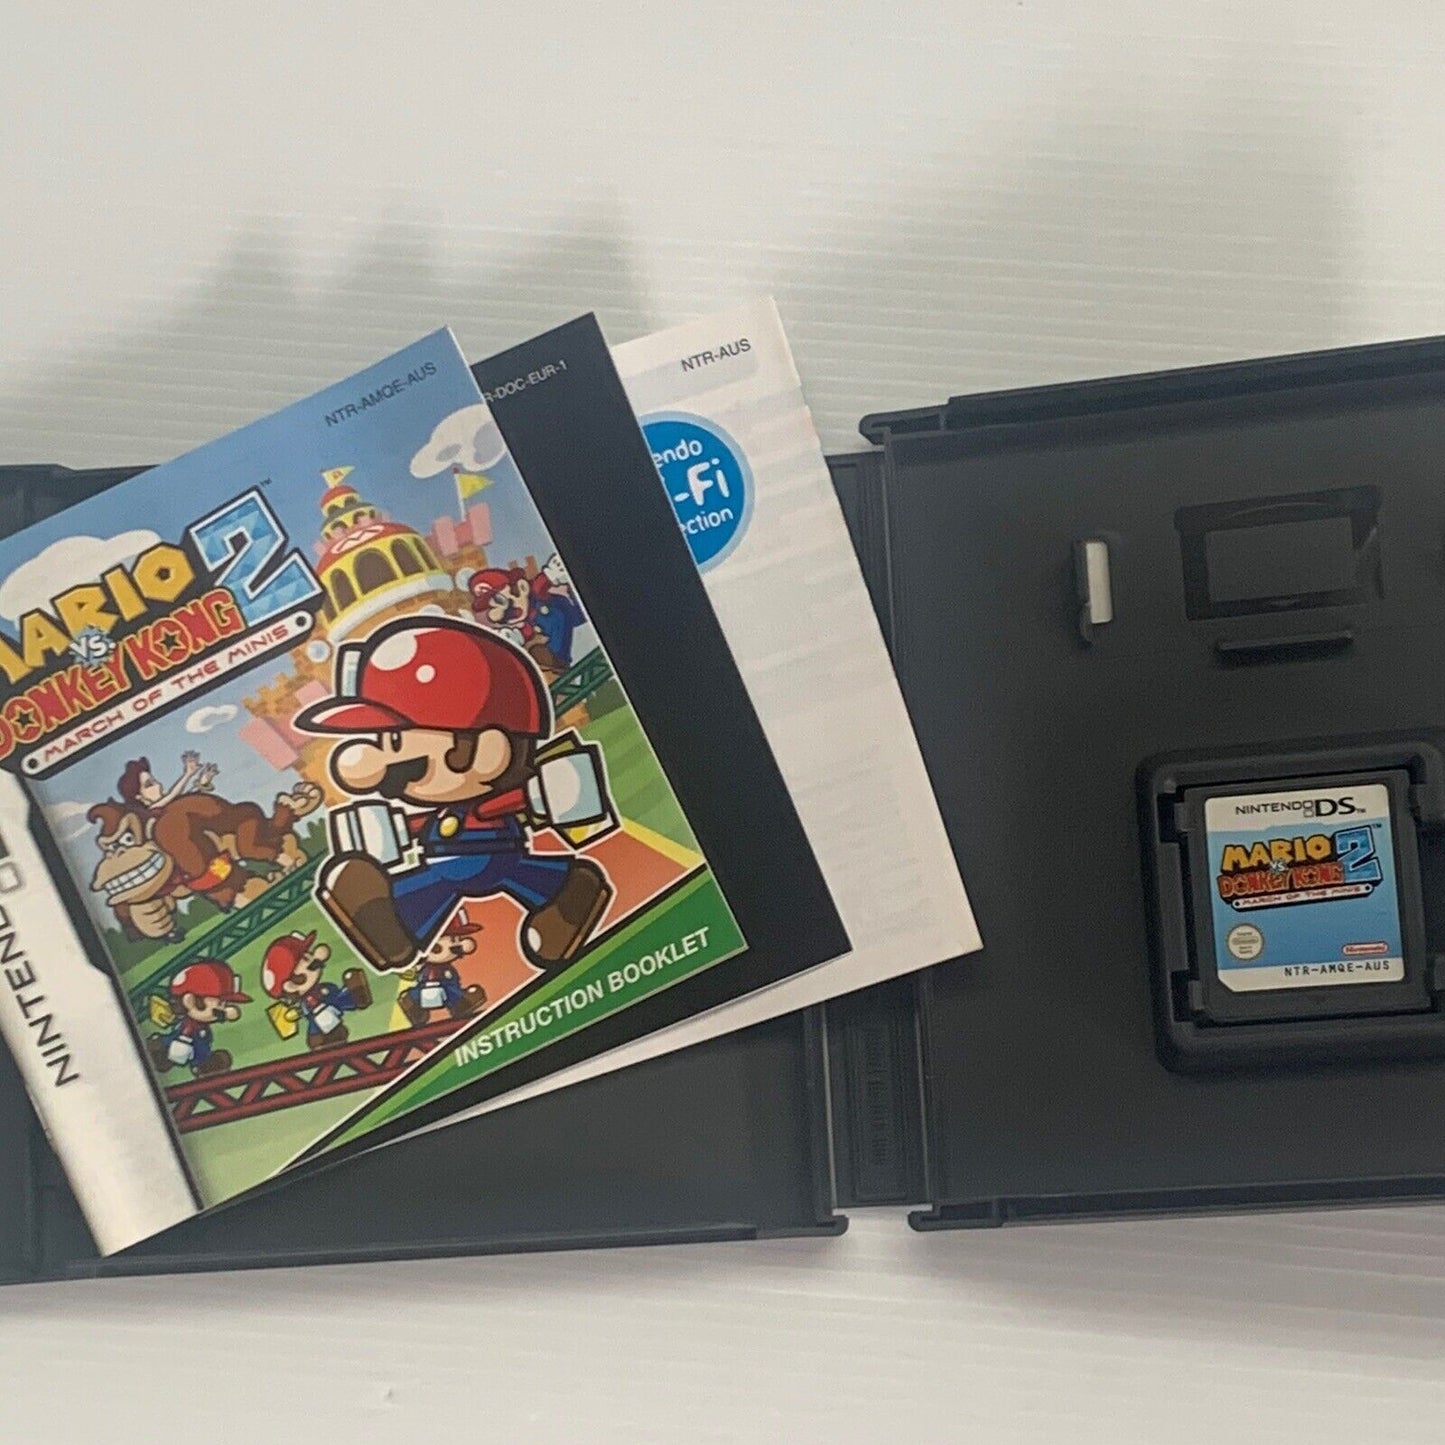 Mario Vs Donkey Kong 2 March Of The Minis Nintendo DS Game